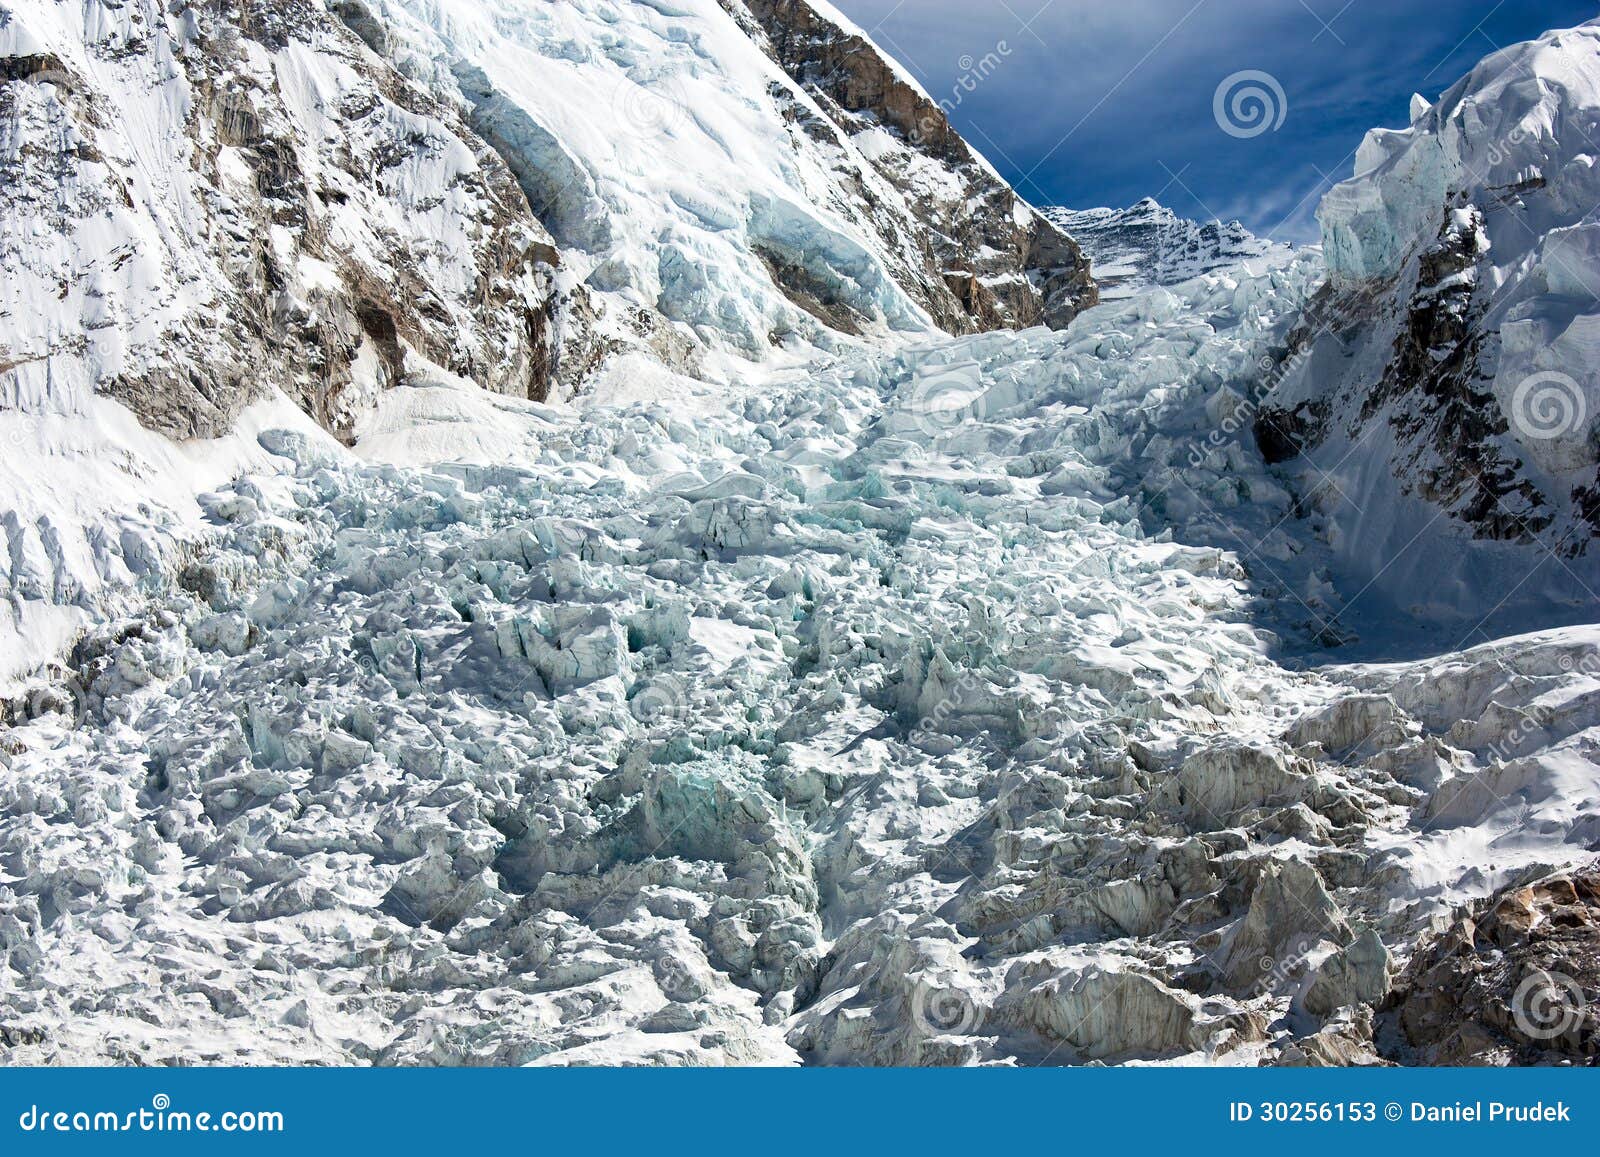 icefall khumbu - view from everest base camp